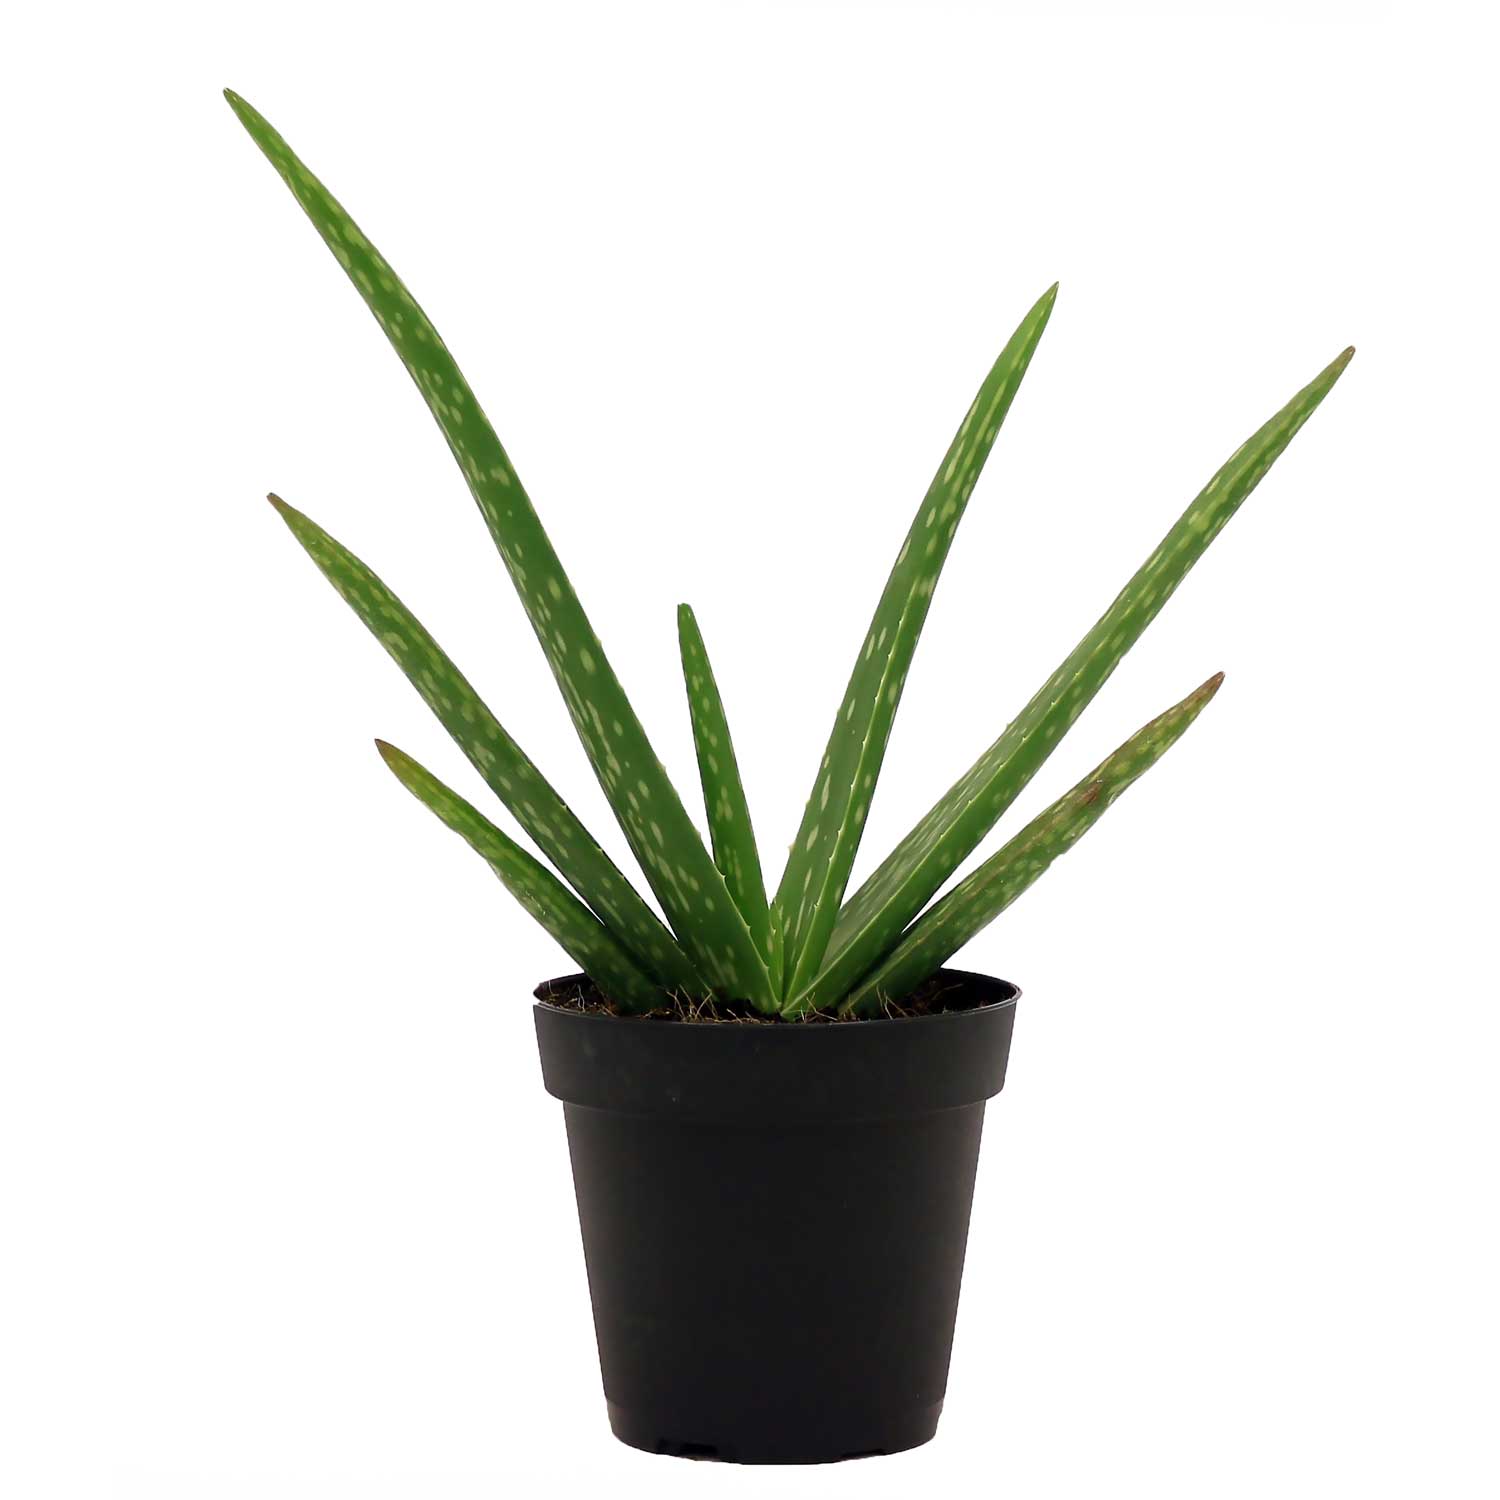 Costa Farms Desert Escape Live Indoor 7in. Tall Green Aloe Vera; Bright, Direct Sunlight Plant in 4in. Grower Pot - image 1 of 11